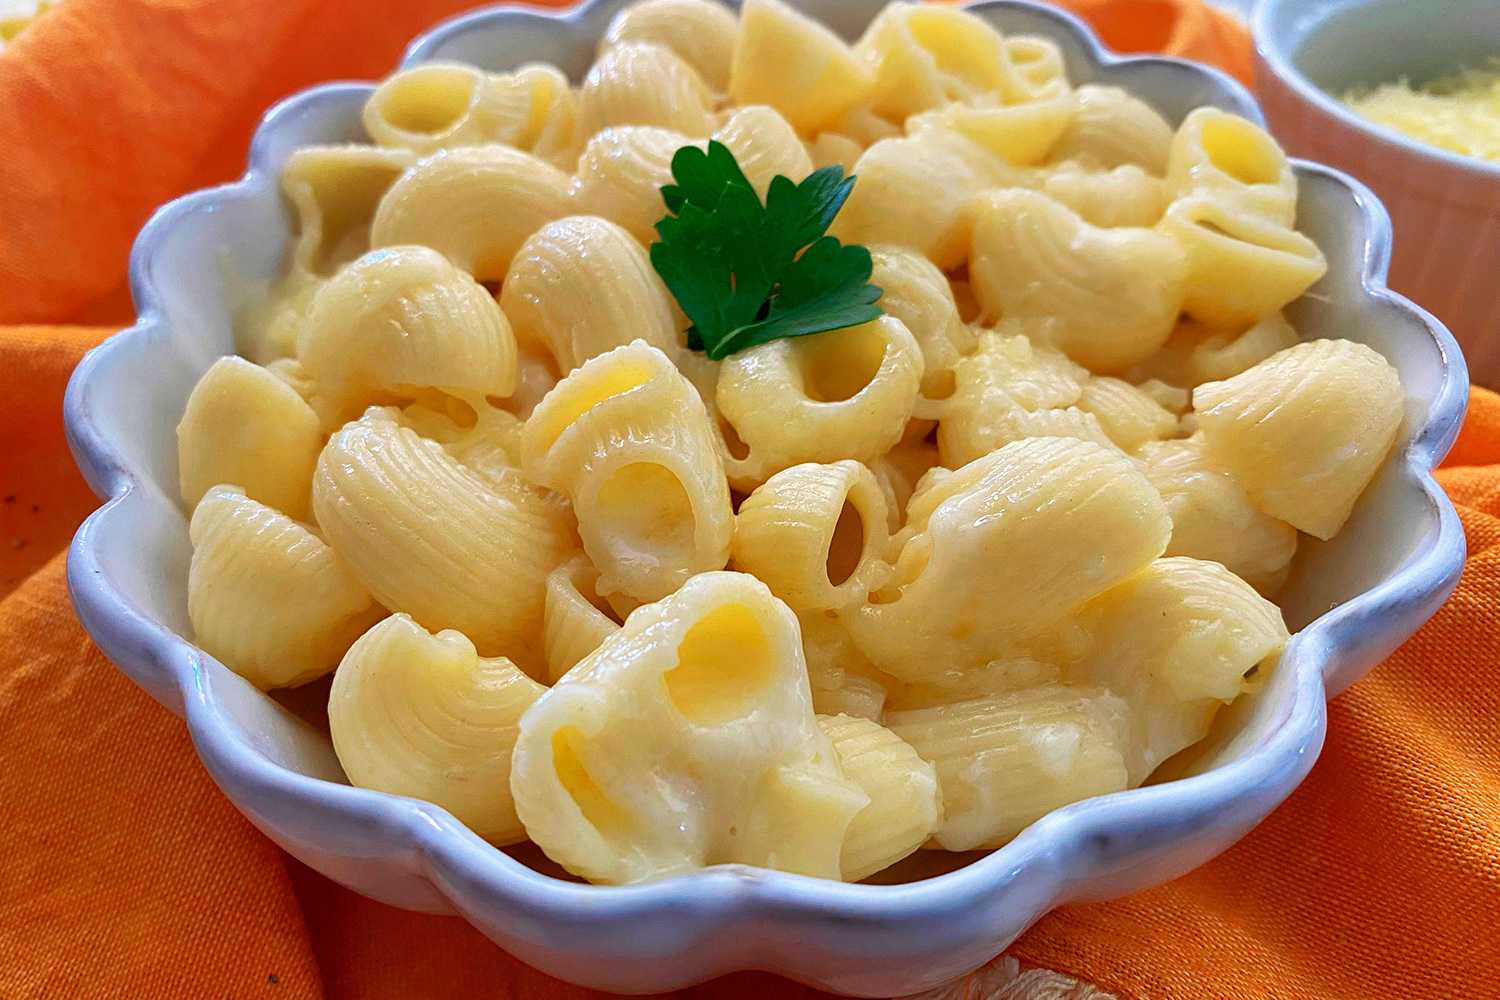 Macaroni mixed with melted cheese with parsley on top in white bowl